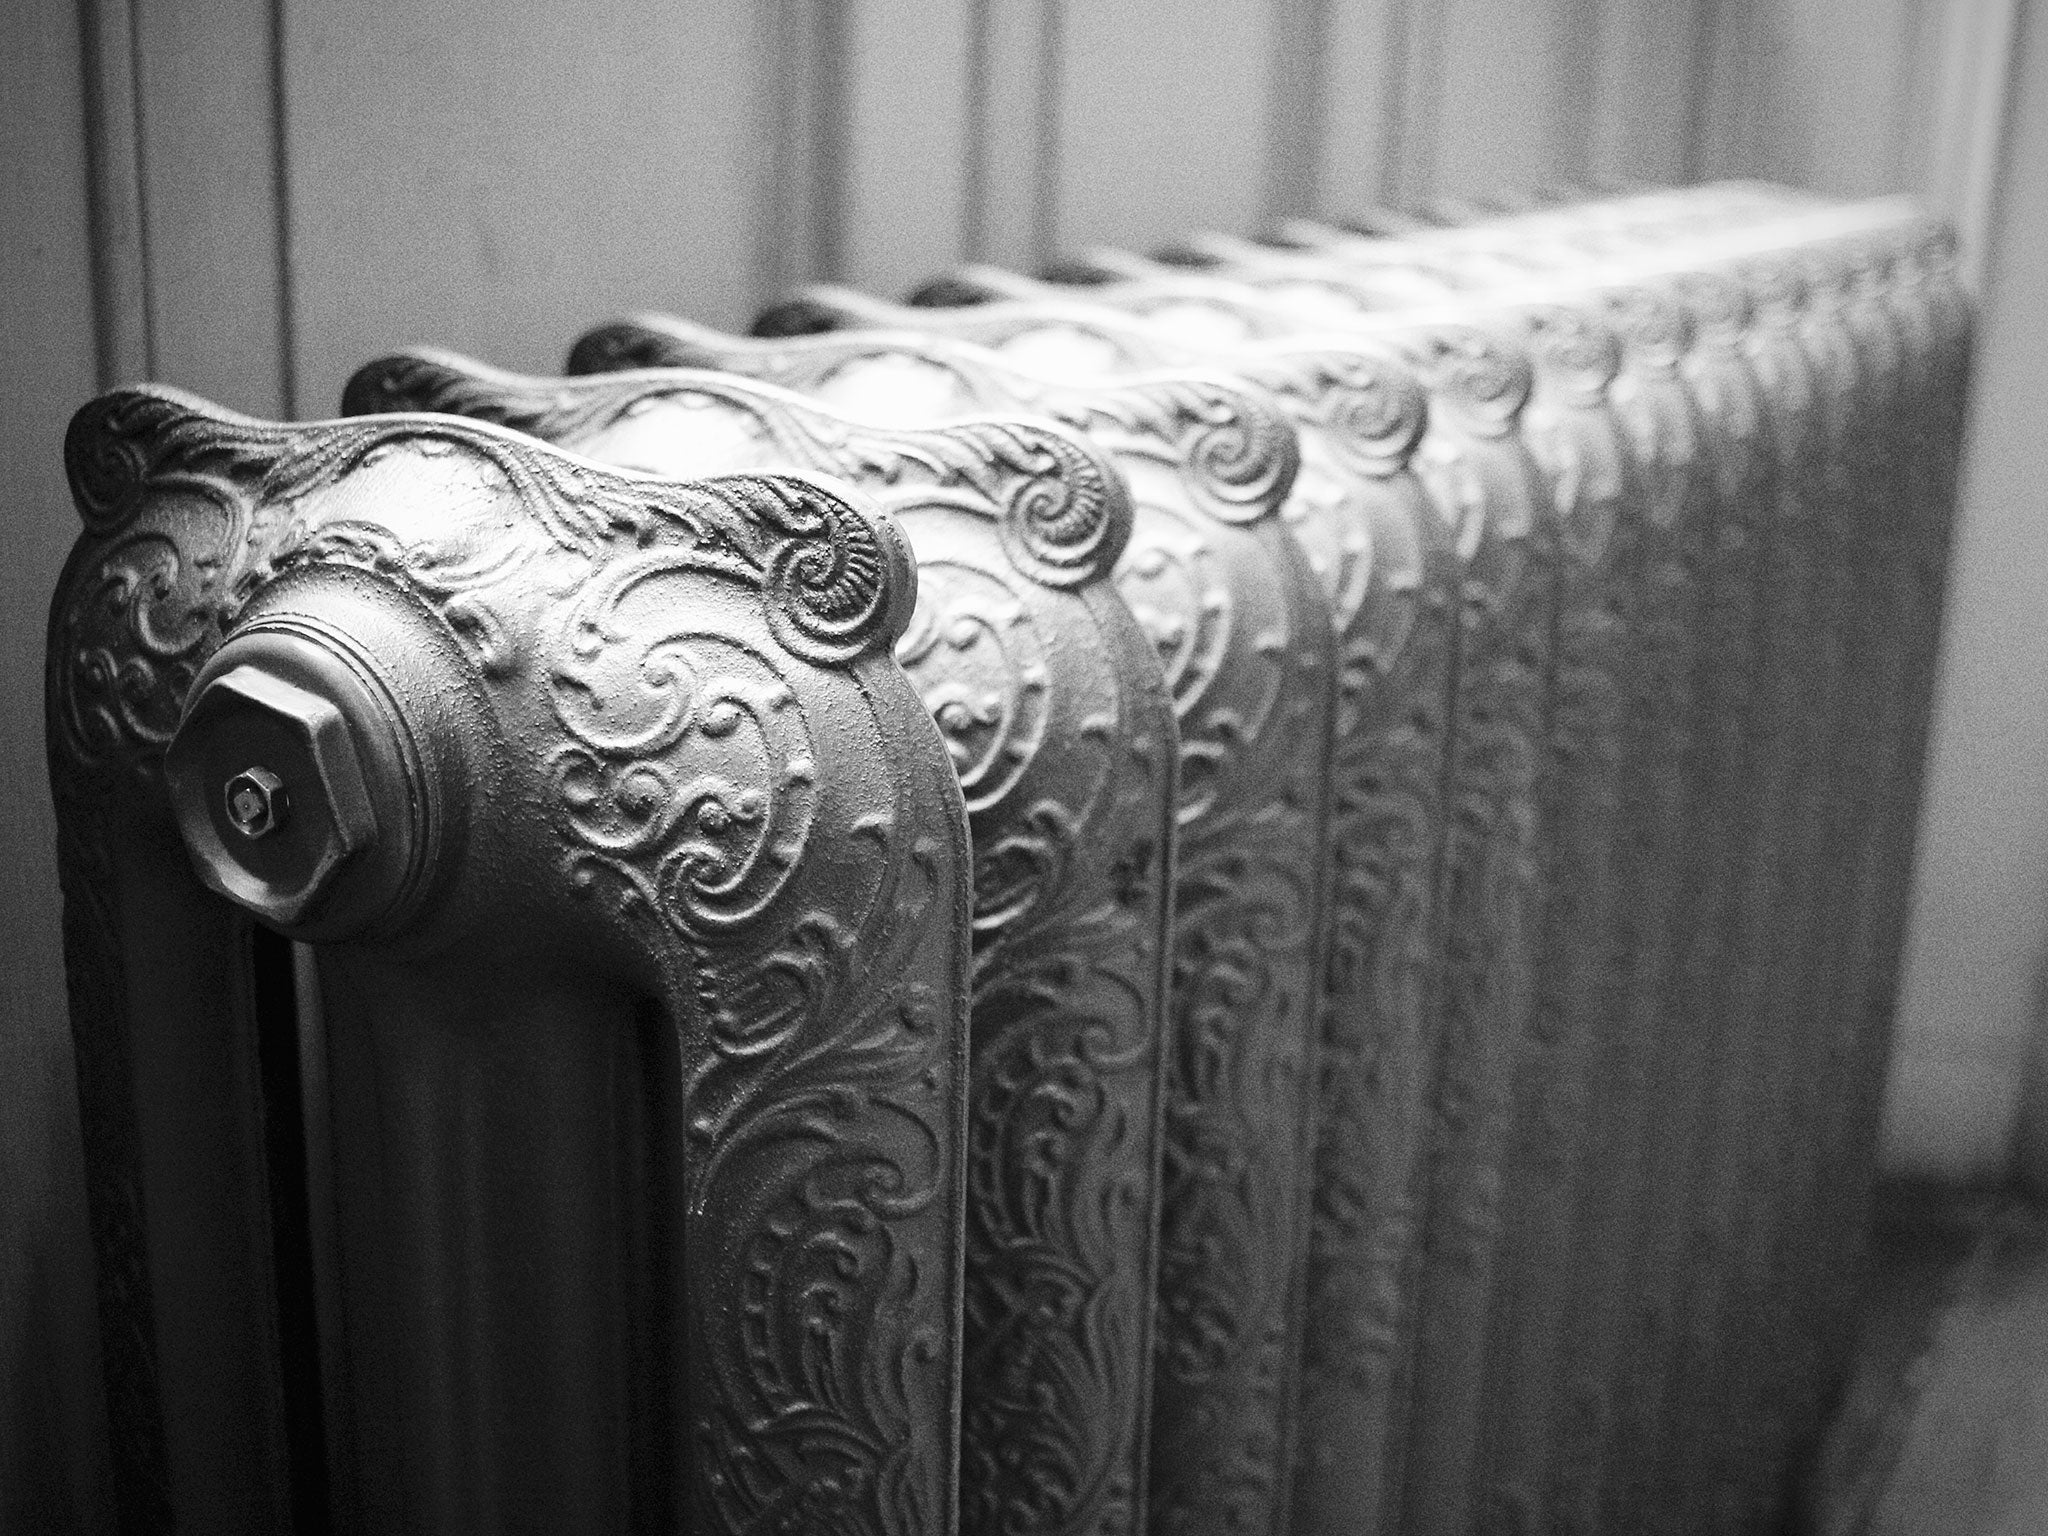 The cast iron radiator is believed to have been thrown from a residential building ran by a charity which supports people with special needs and learning disabilities